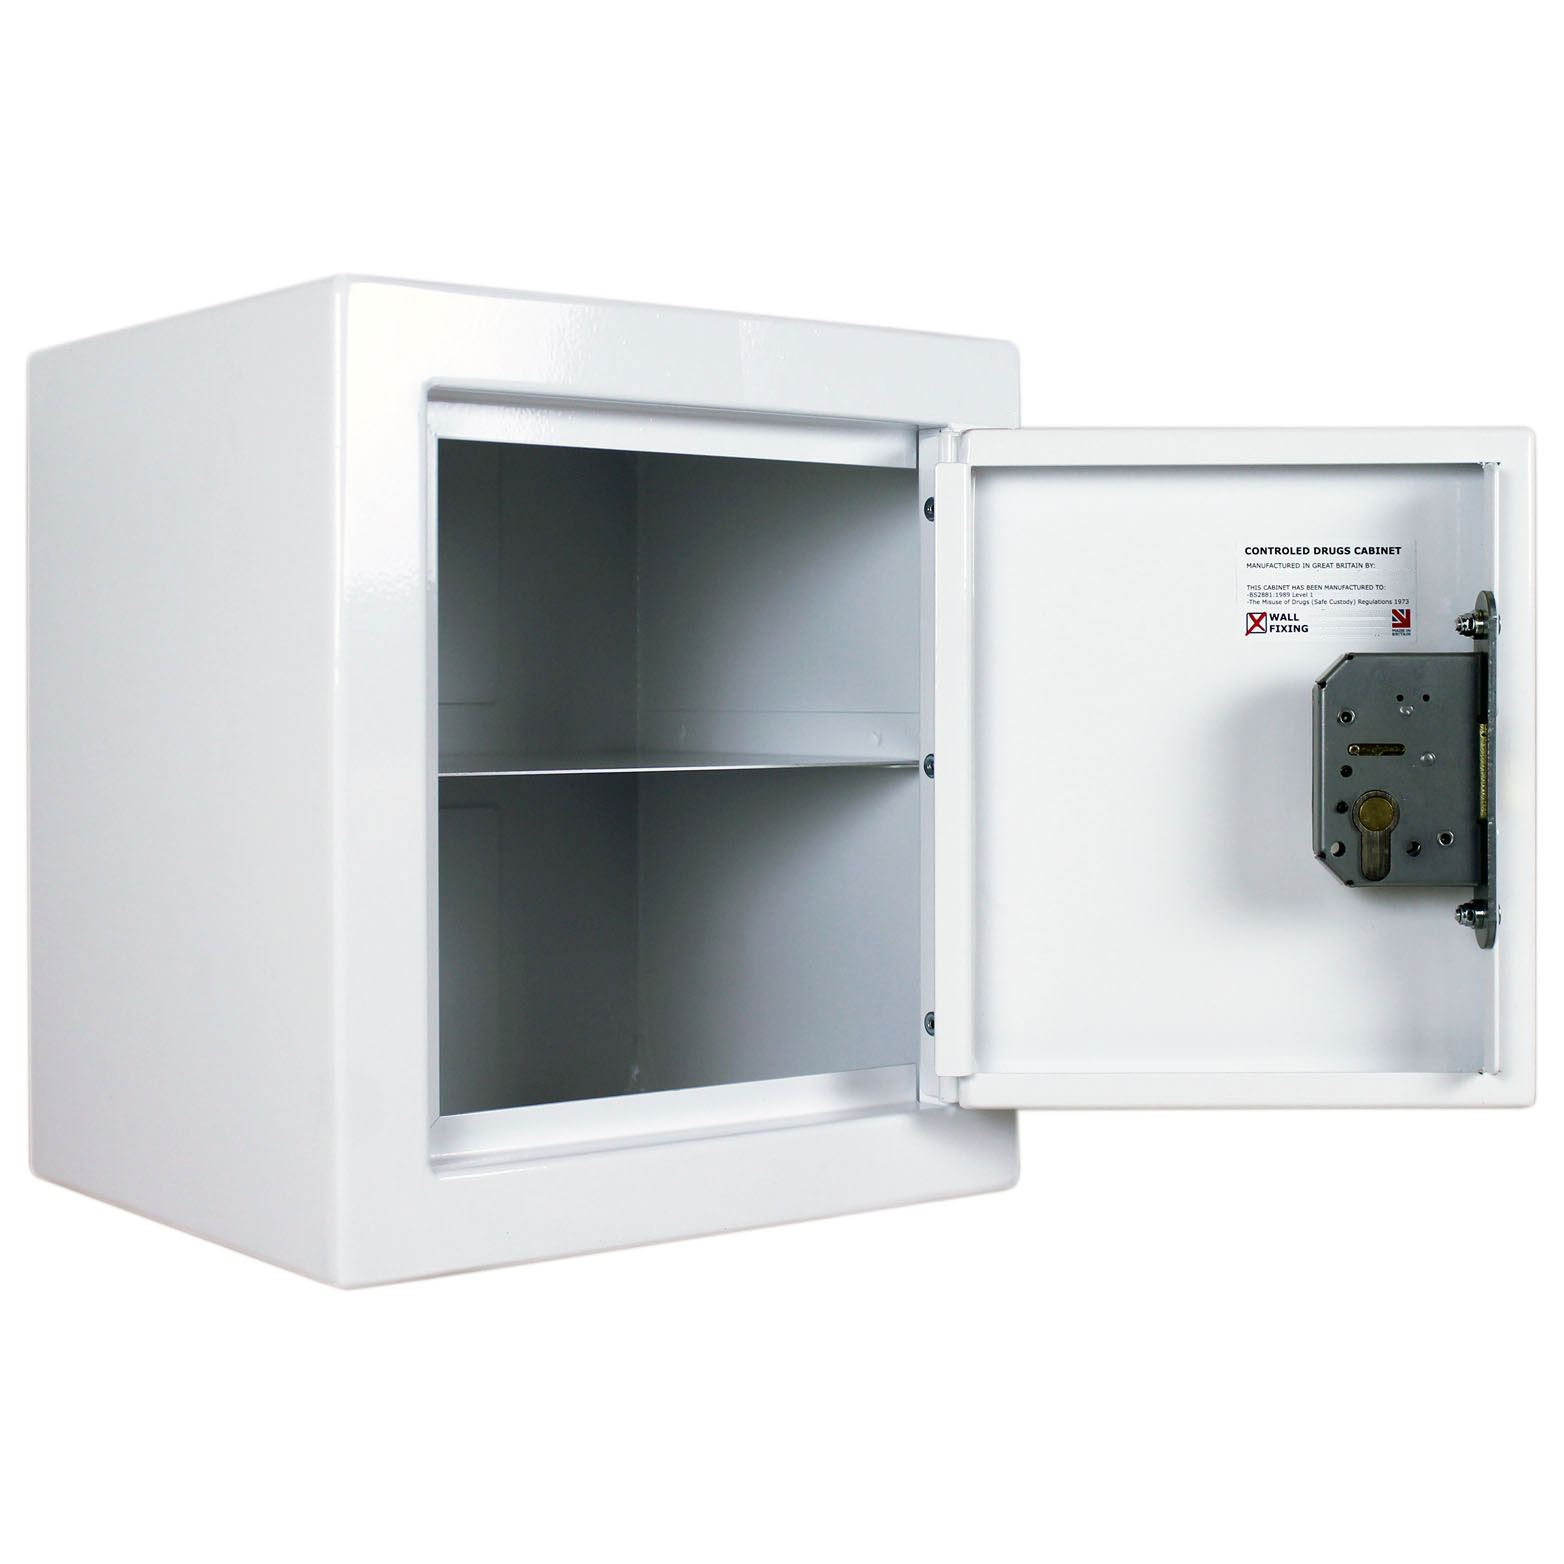 Controlled Drugs Cabinet | 27 Litre Small 